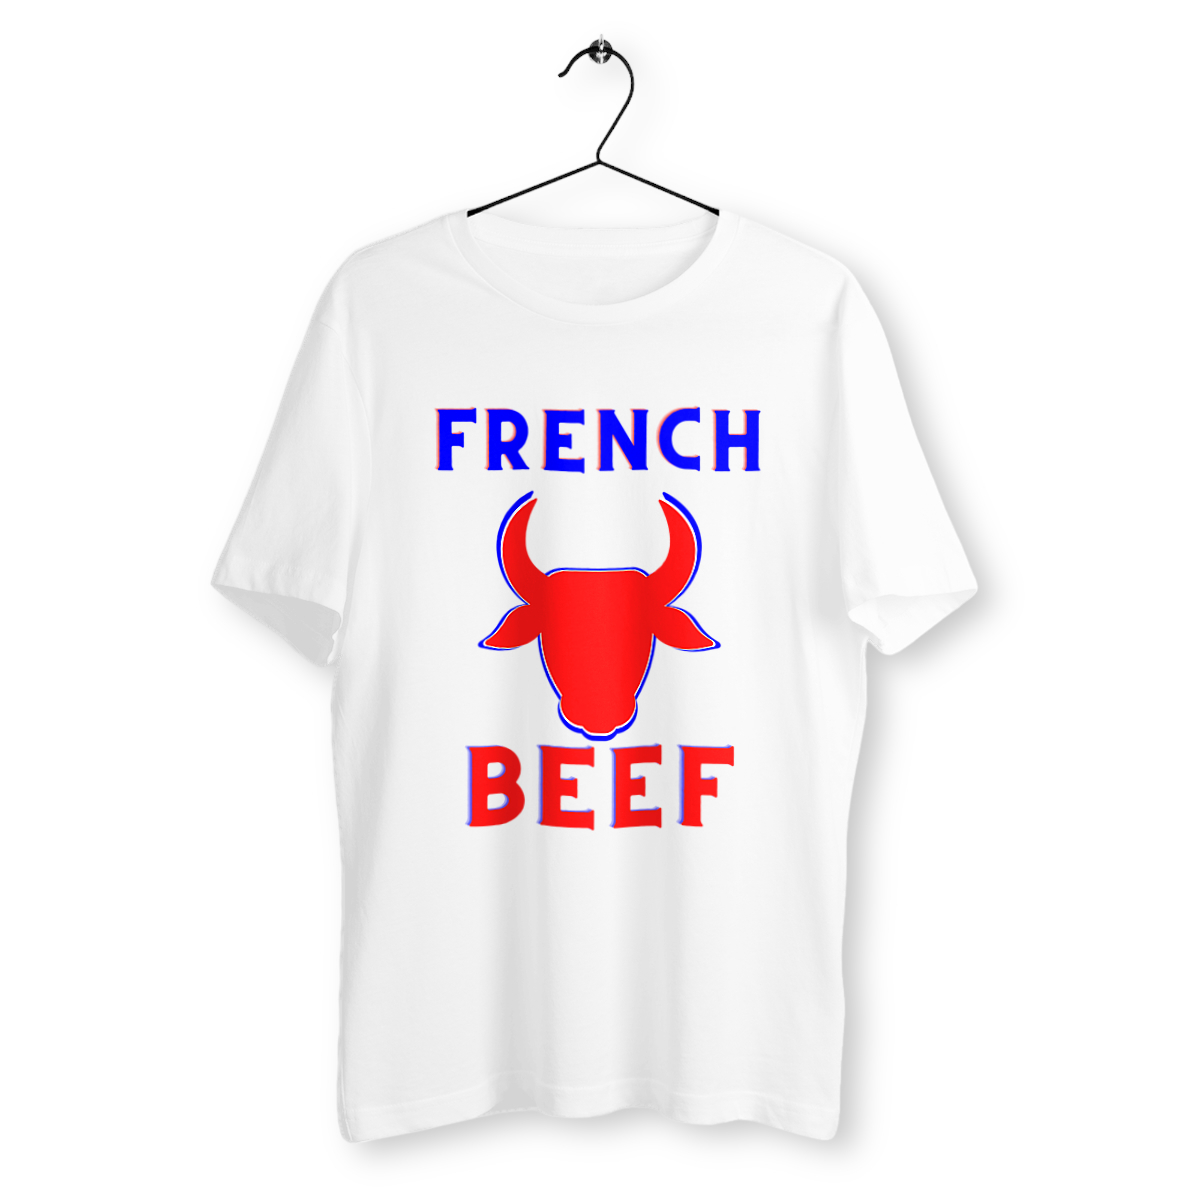 T-shirt "French Beef"